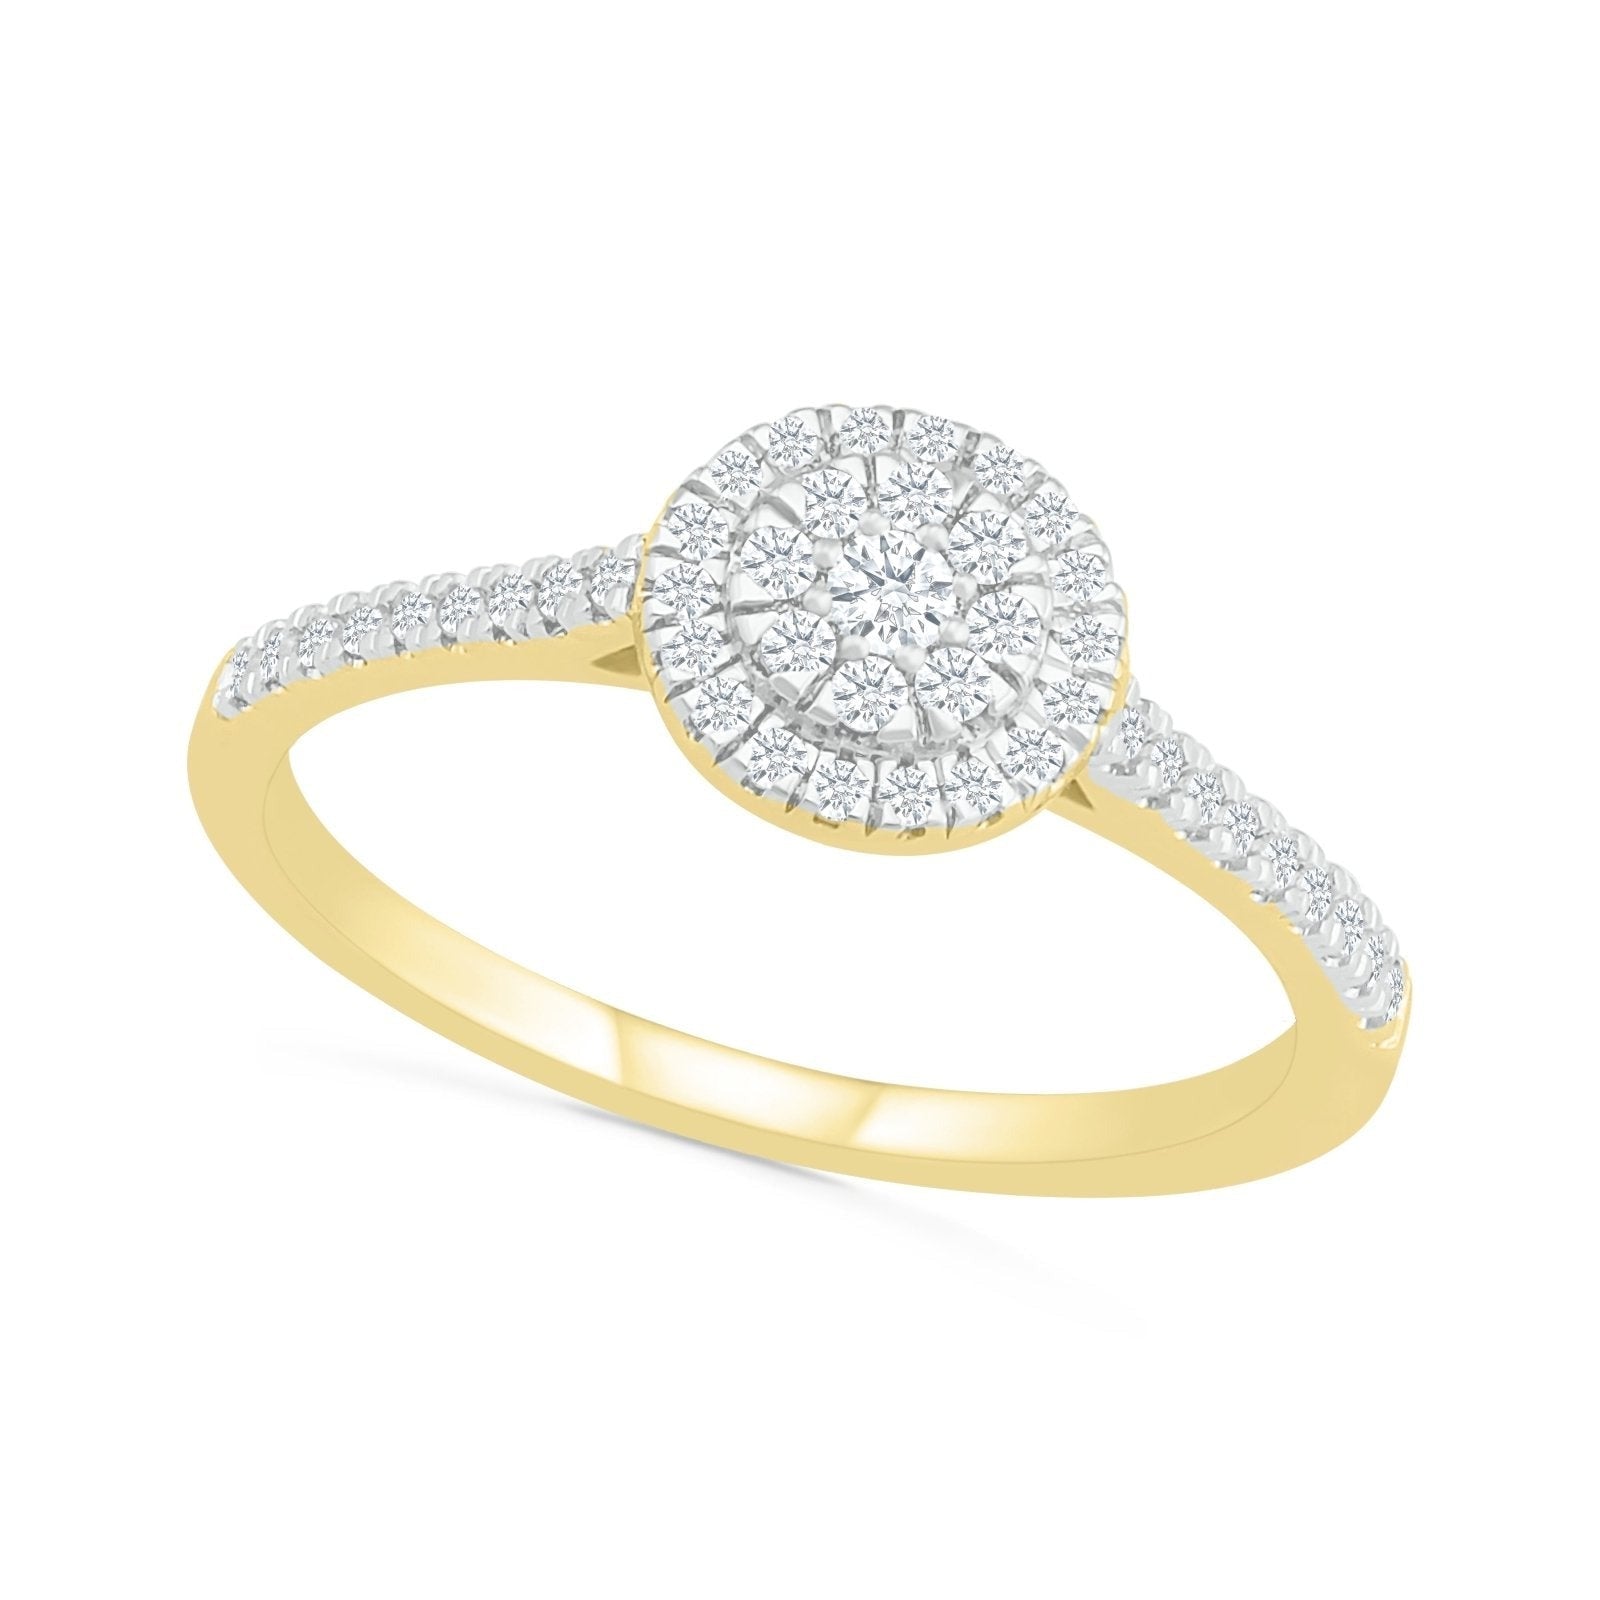 Pave Diamond Round Illusion Ring with Diamond Halo Rings Estella Collection #product_description# 32763 Diamond Made to Order Yellow Gold #tag4# #tag5# #tag6# #tag7# #tag8# #tag9# #tag10#